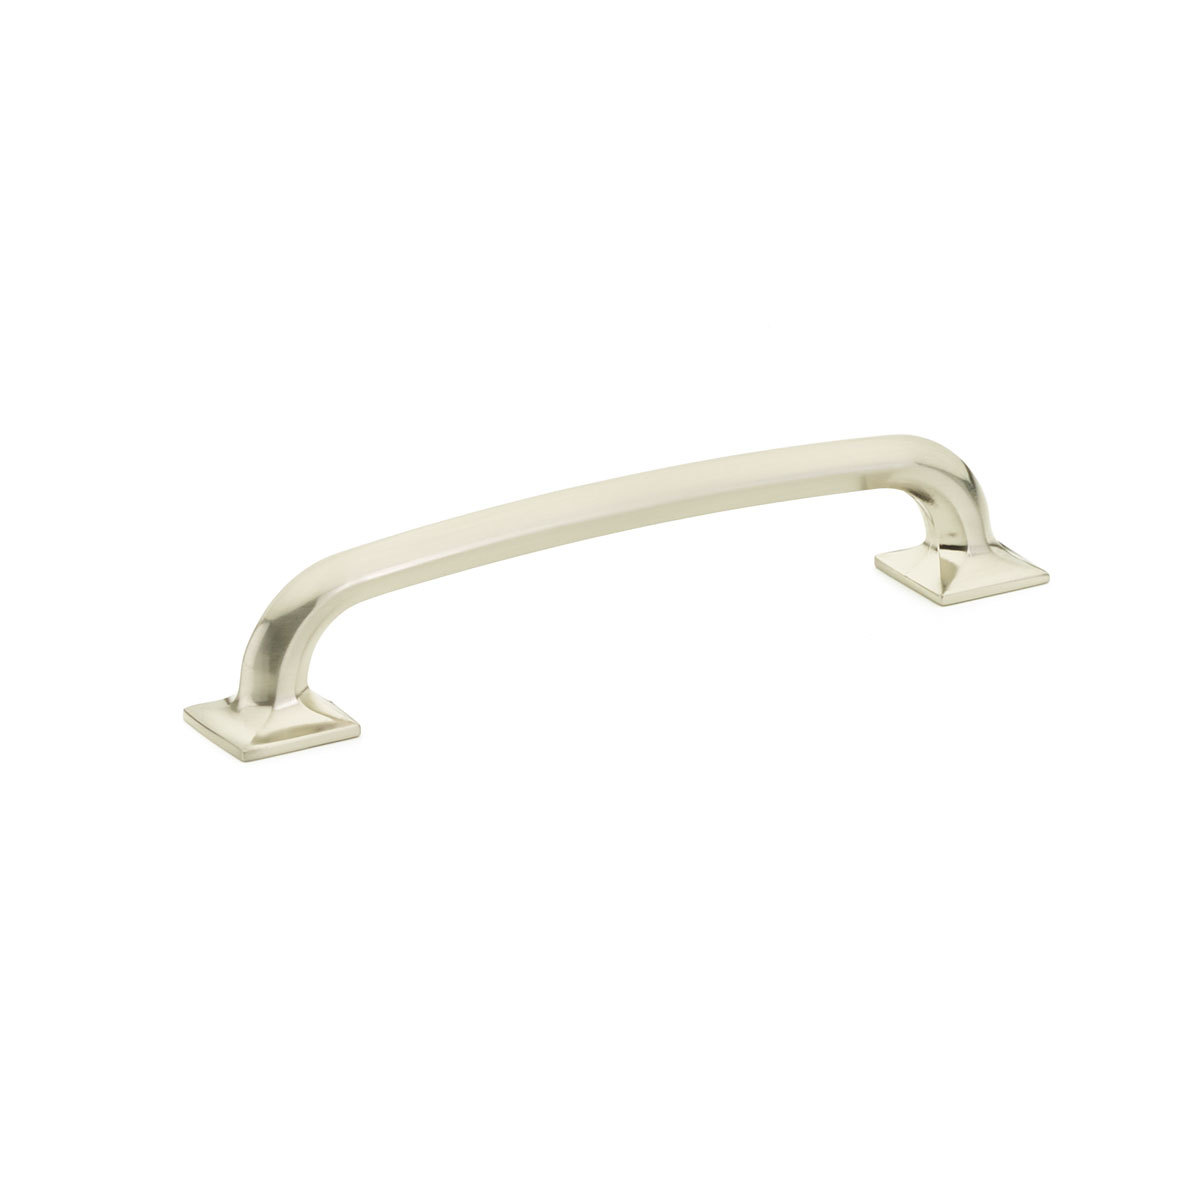 Schaub 207-BN Pull, Square Bases, Brushed Nickel, 6" CC - Brushed Nickel